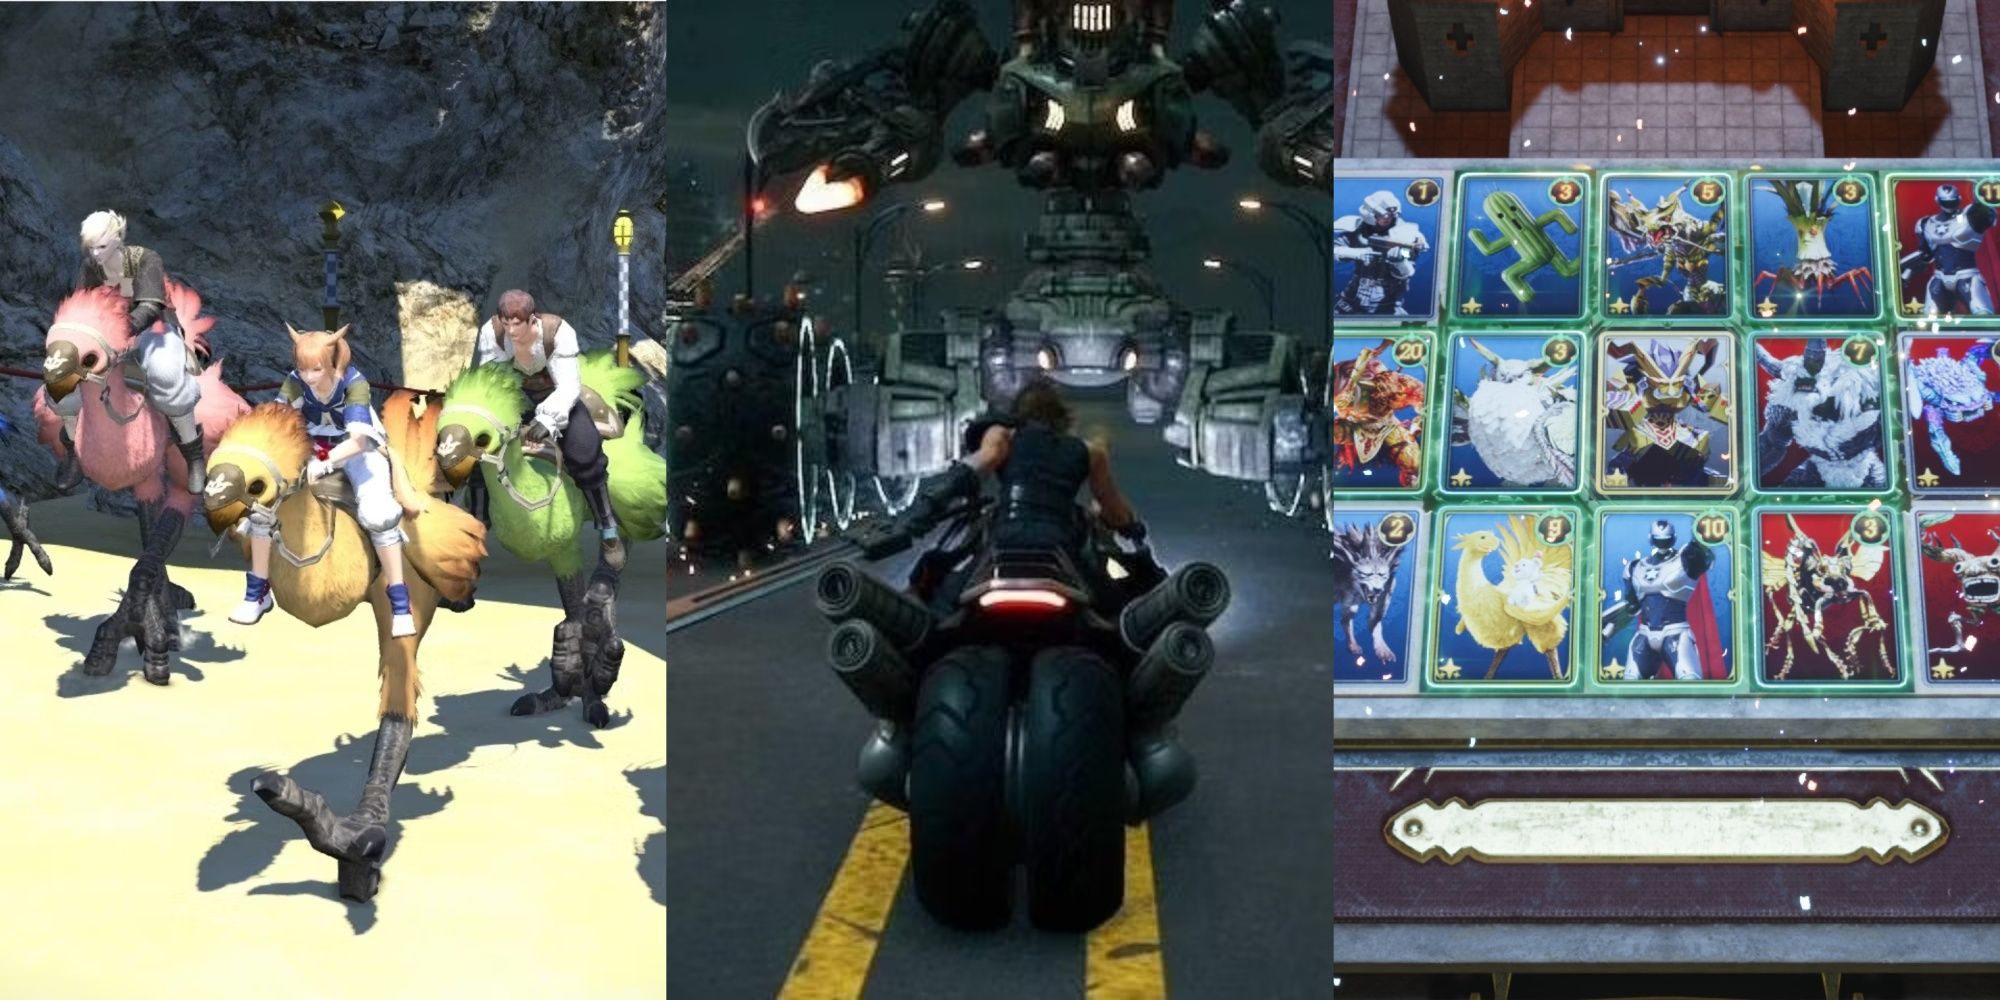 Final Fantasy Best Minigames Feature Image showing chocobo racing in ff14, g-bike in ff7 remake, an queen's blood in ff7 rebirth